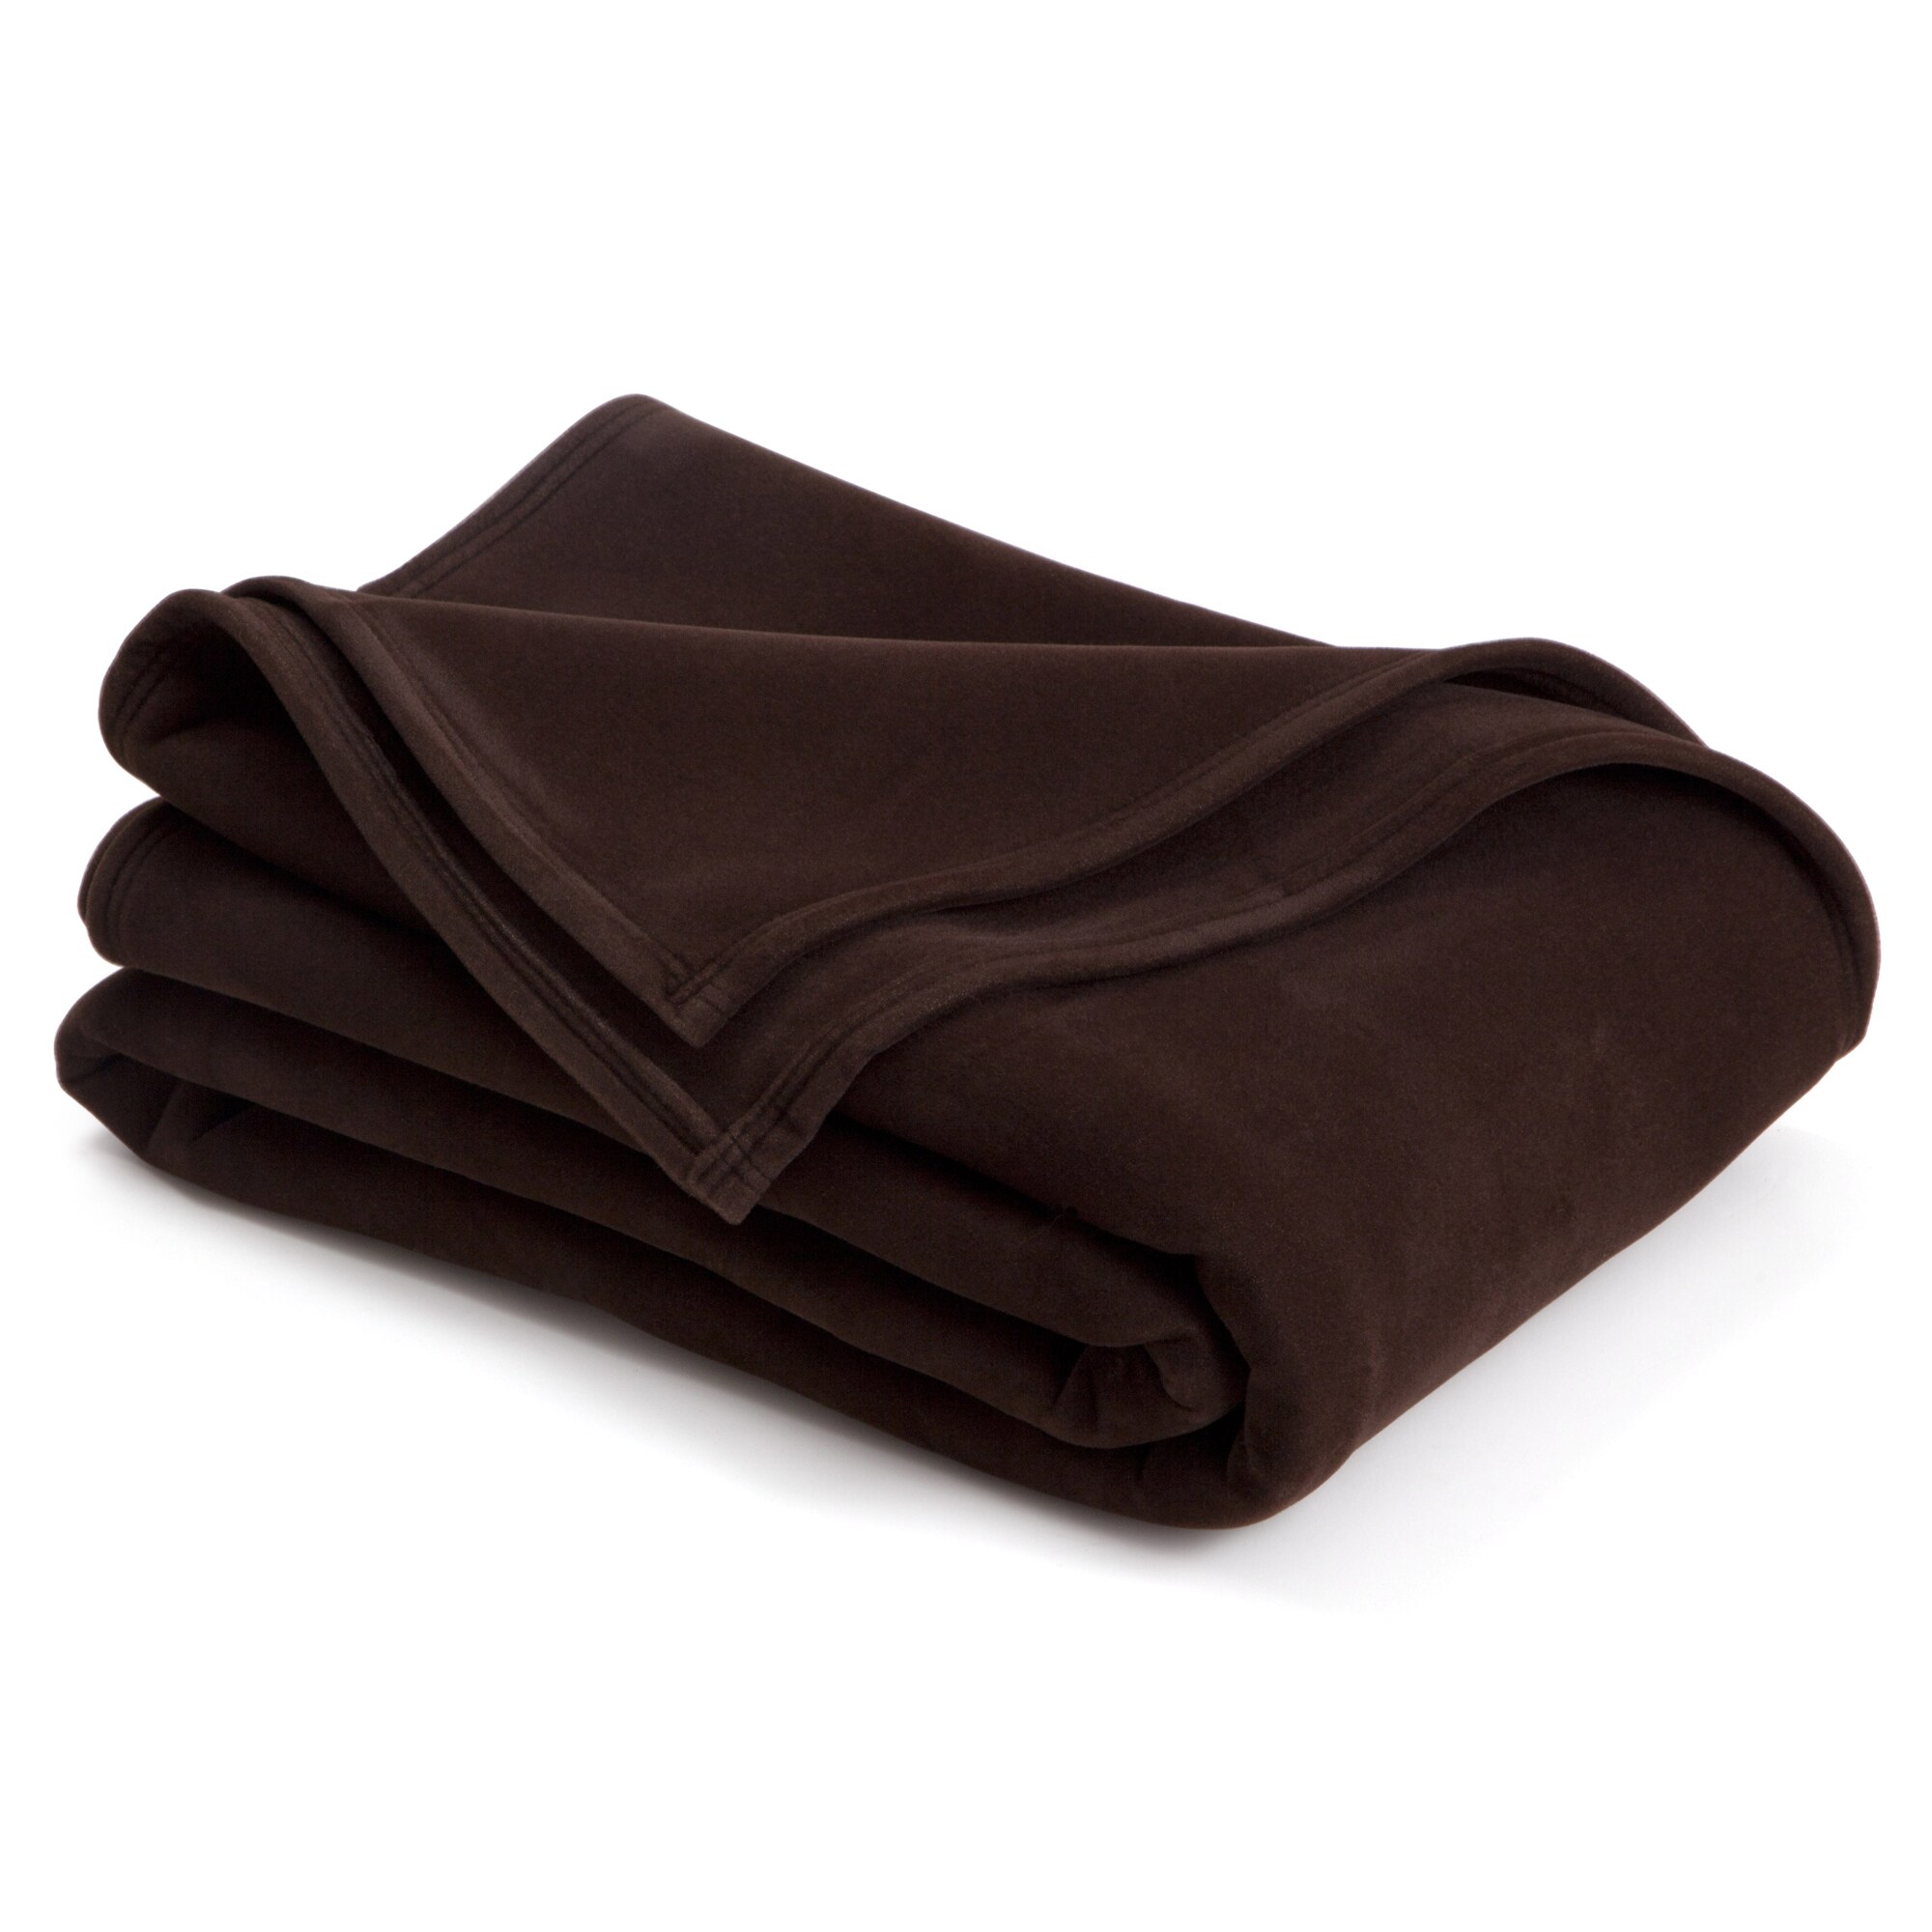 Vellux Plush Blanket | Blankets & Throws | Home ...